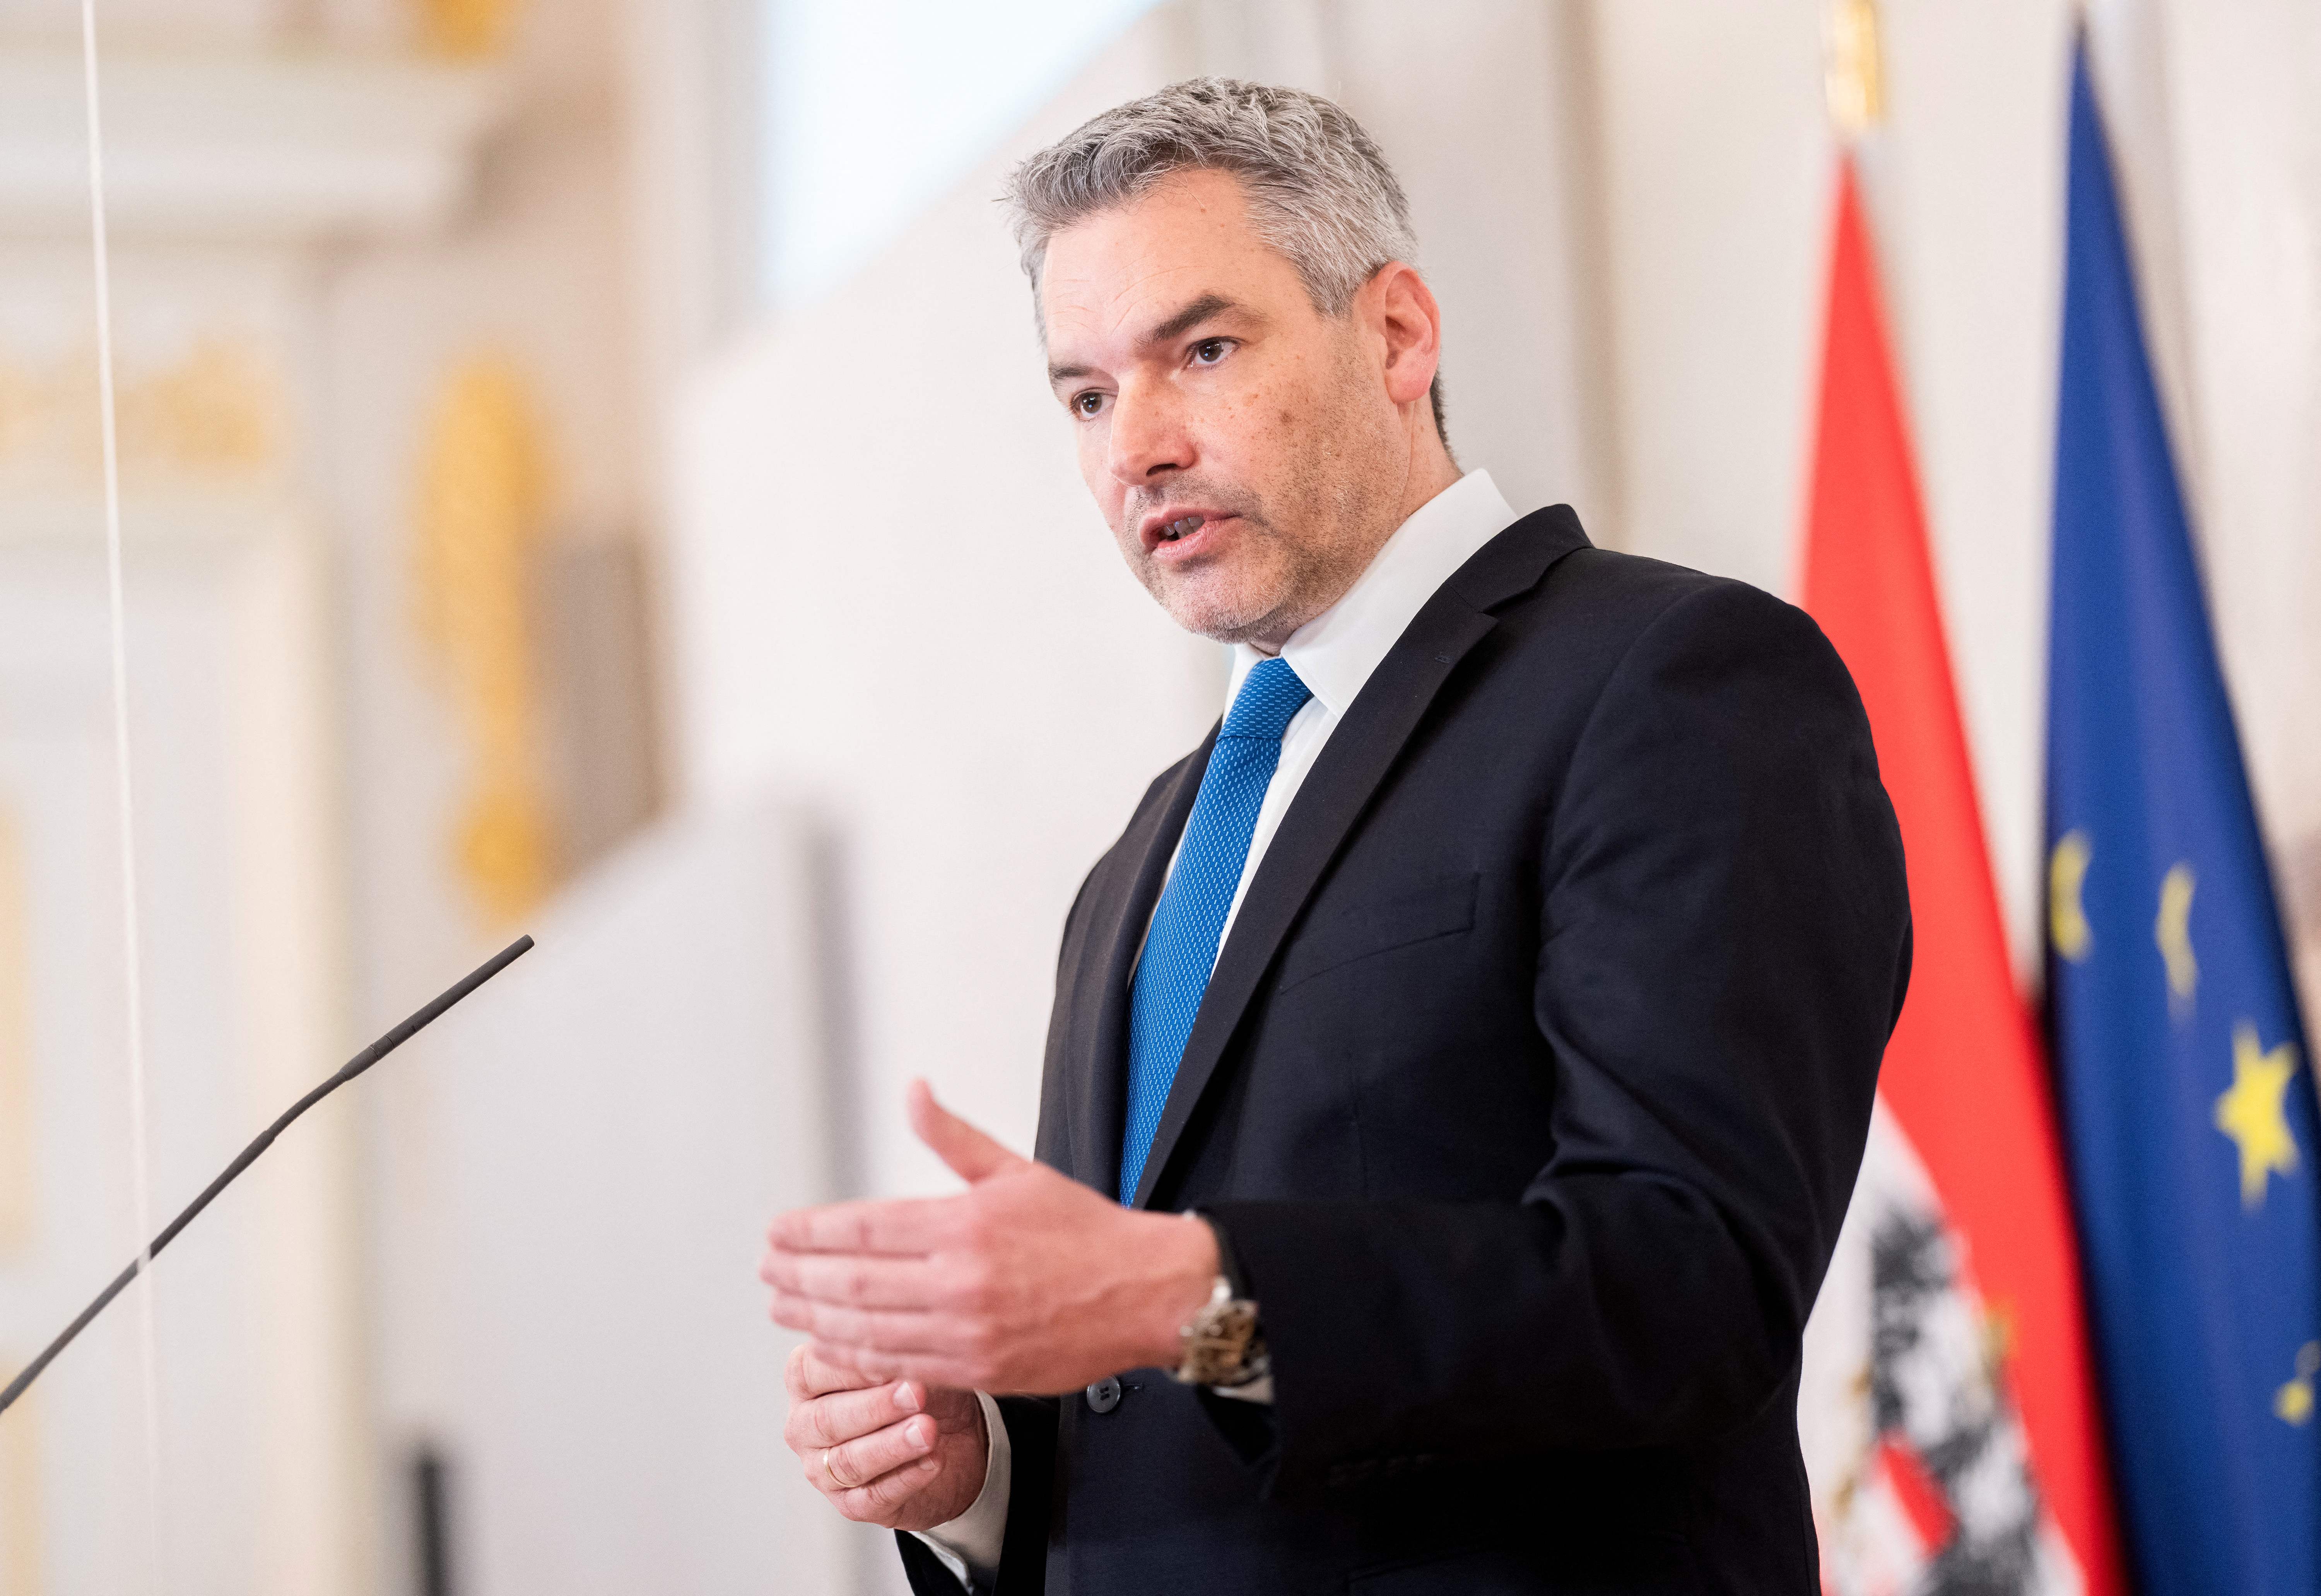 Austrian Chancellor Karl Nehammer gives a press statement on the current situation in Ukraine after a meeting of the crisis cabinet in Vienna, Austria, on February 22.